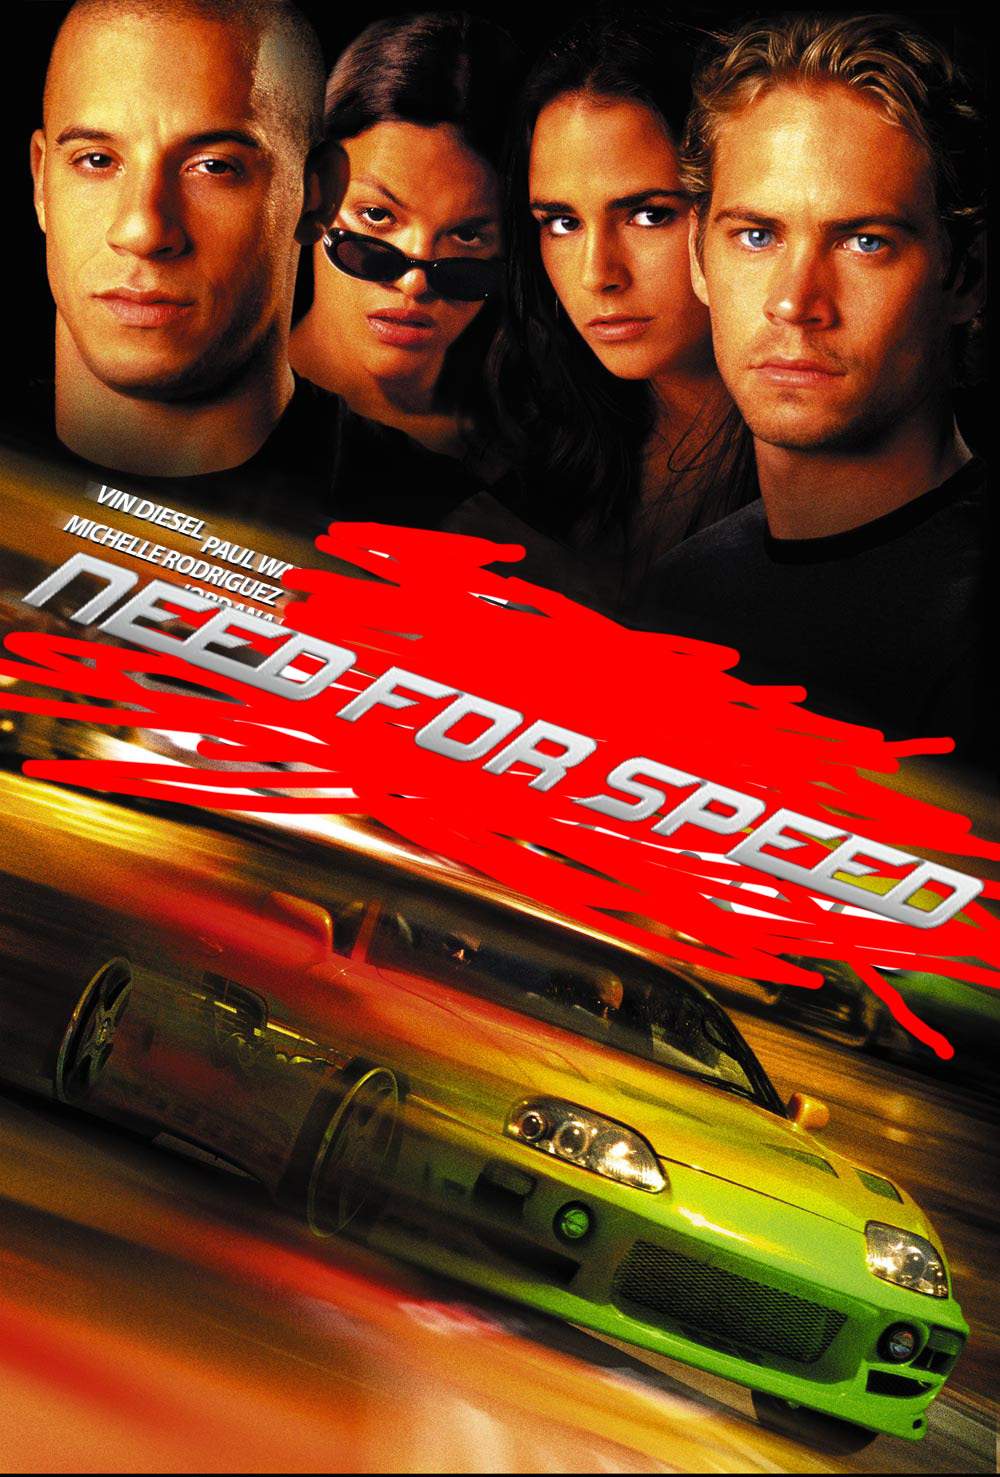 Need For Speed Quotes. QuotesGram